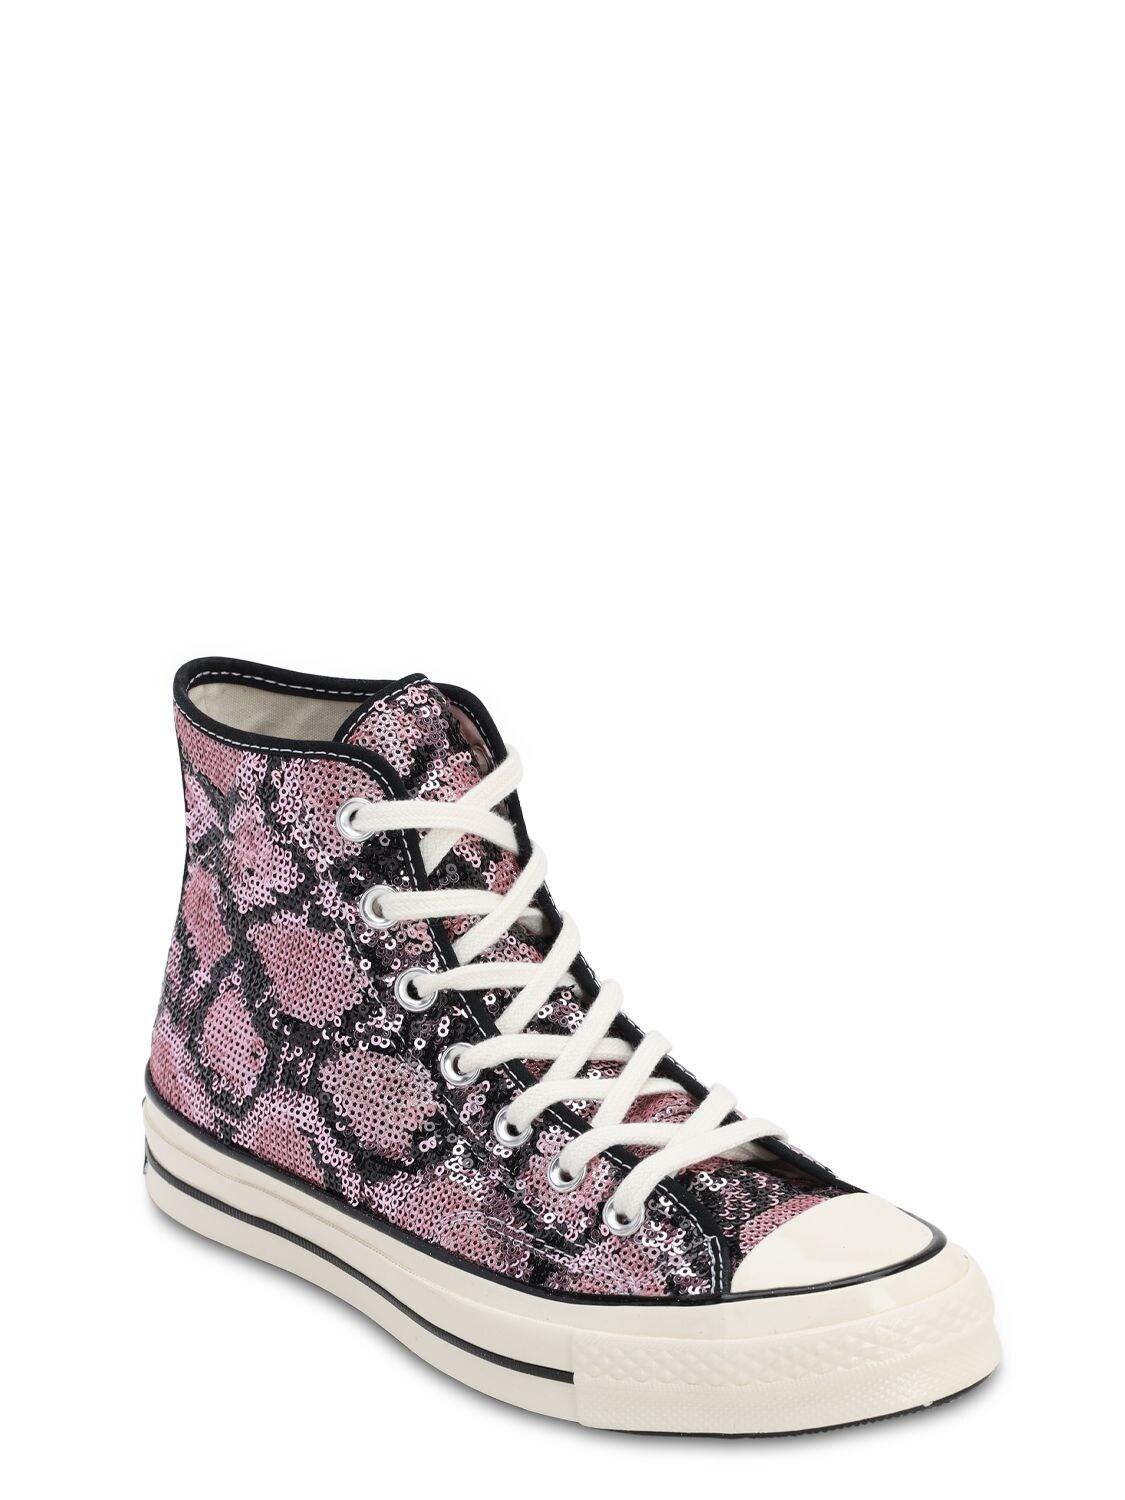 Converse Chuck 70 Snake Sequins Sneakers | Lyst